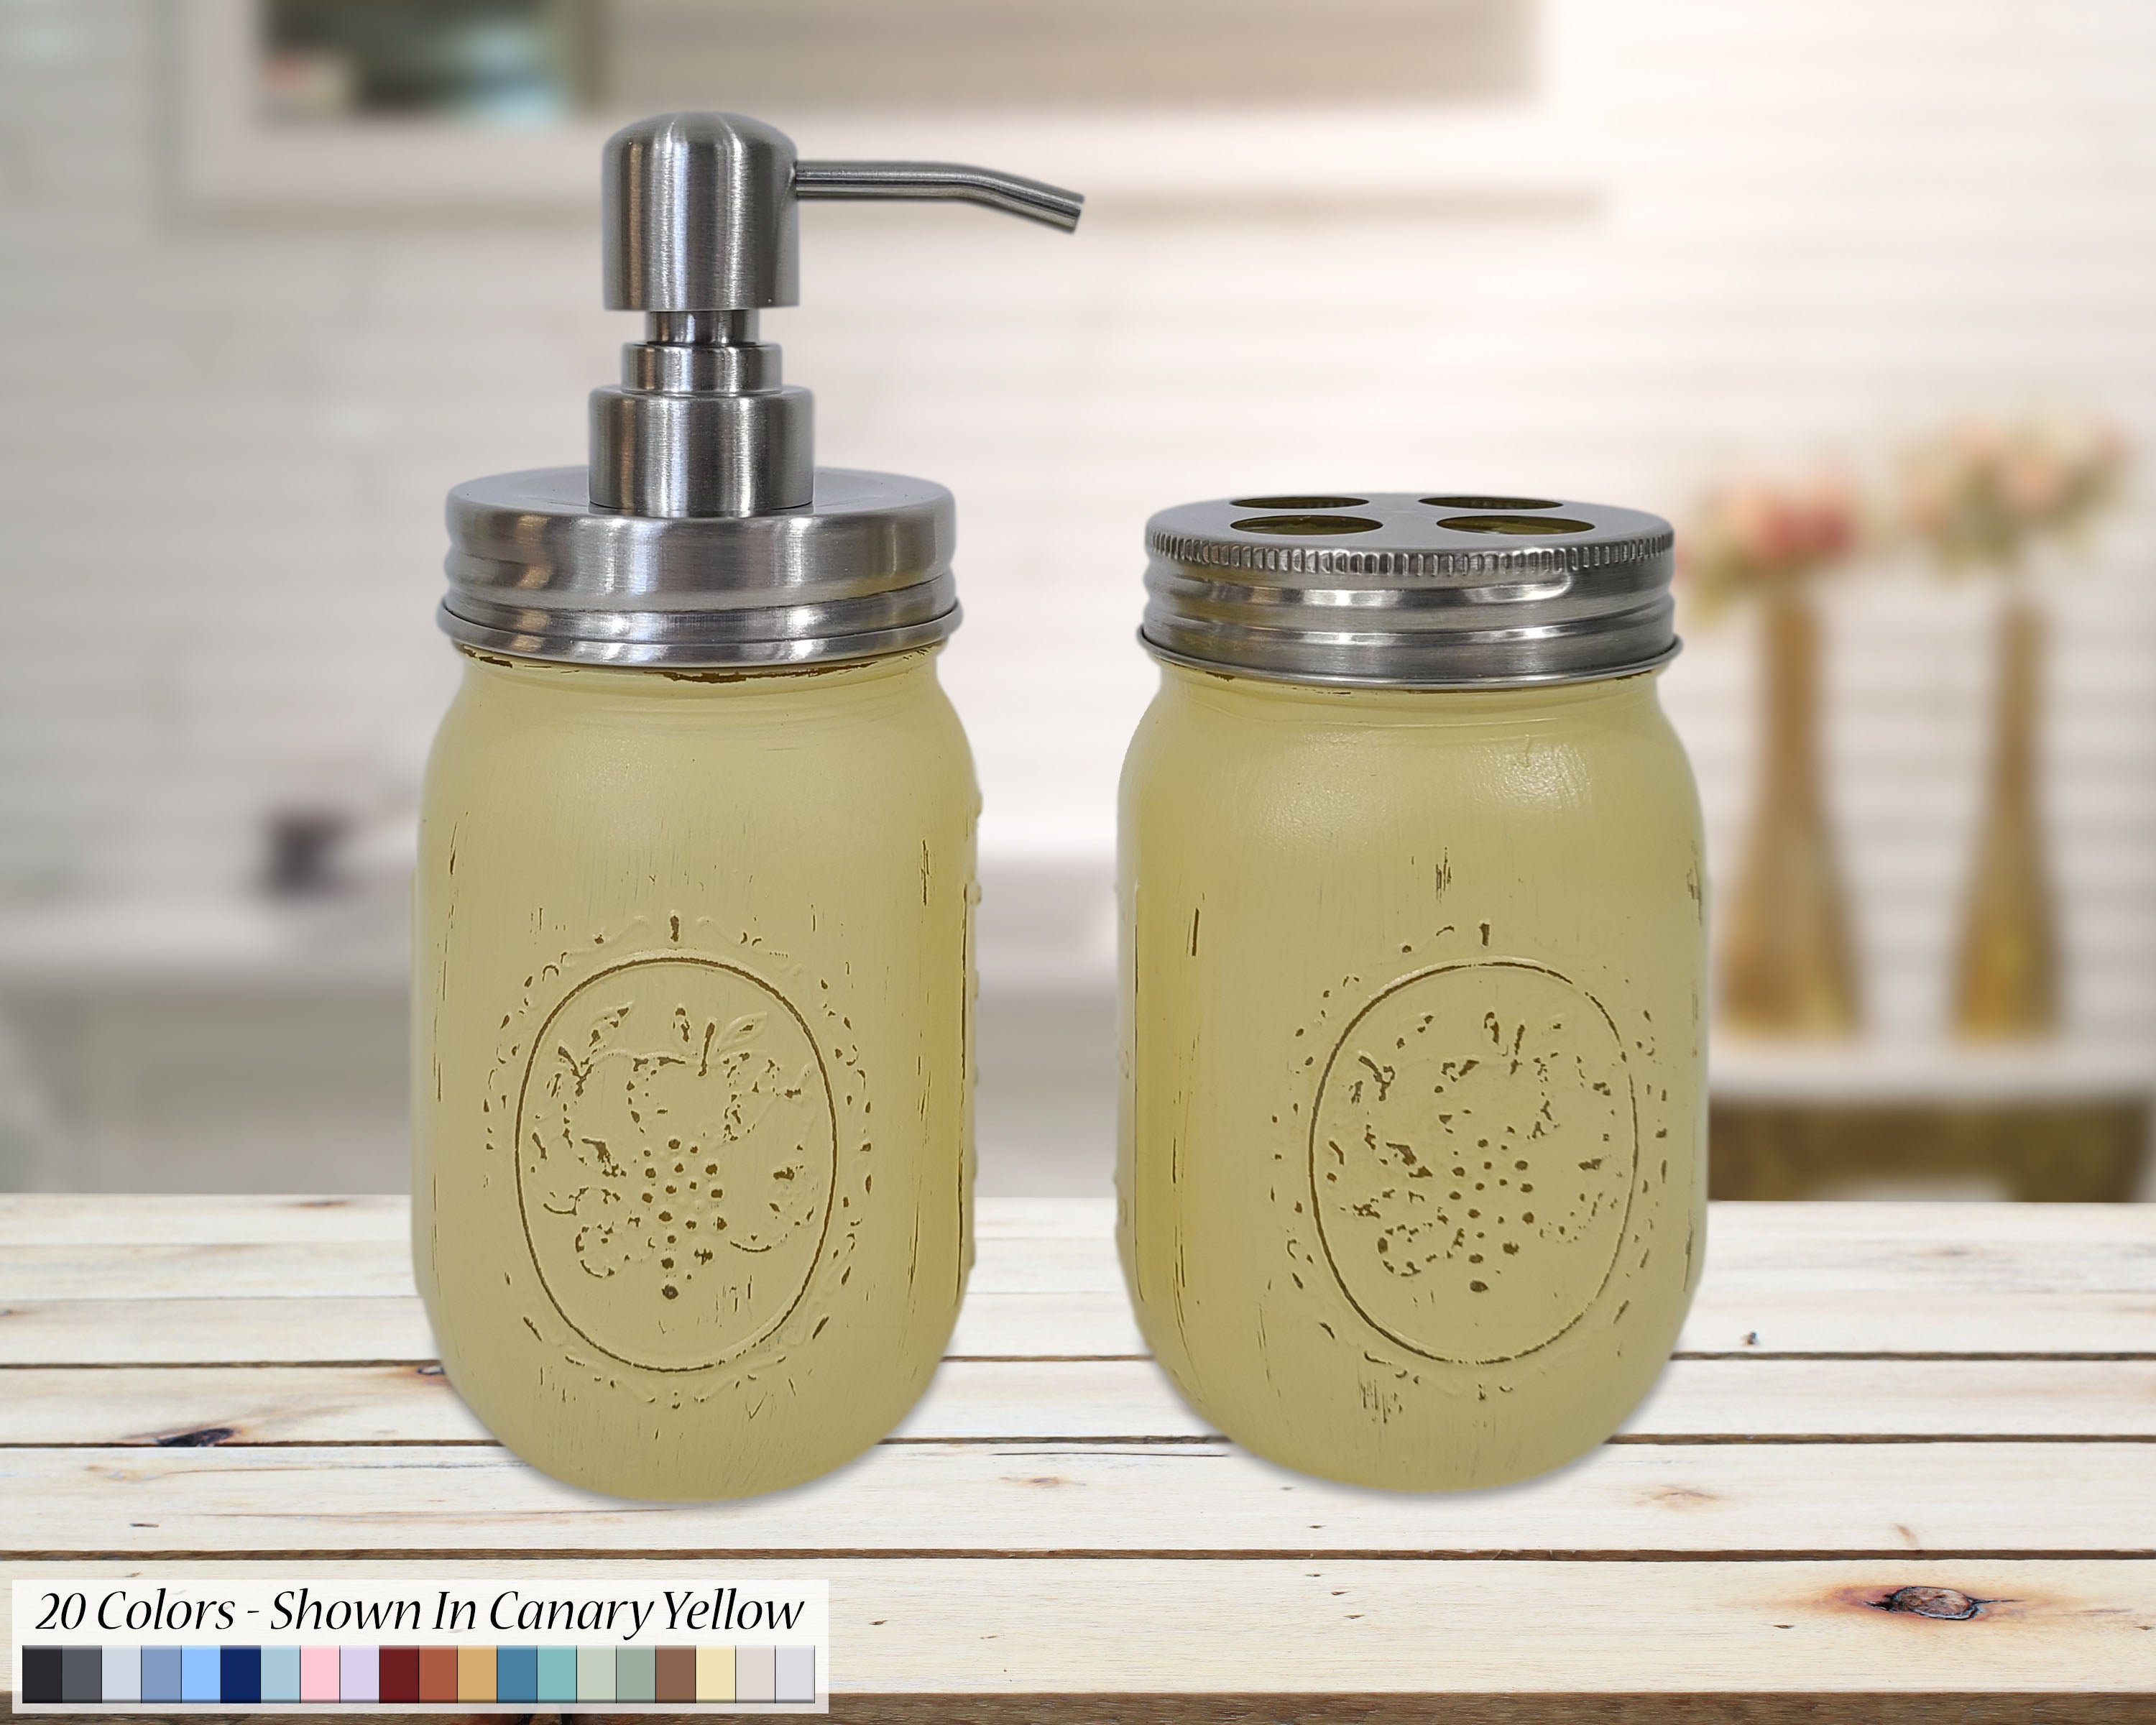 Mason Jar Soap Pump & Toothbrush Holder Set, Handmade in the USA by Lane of Lenore